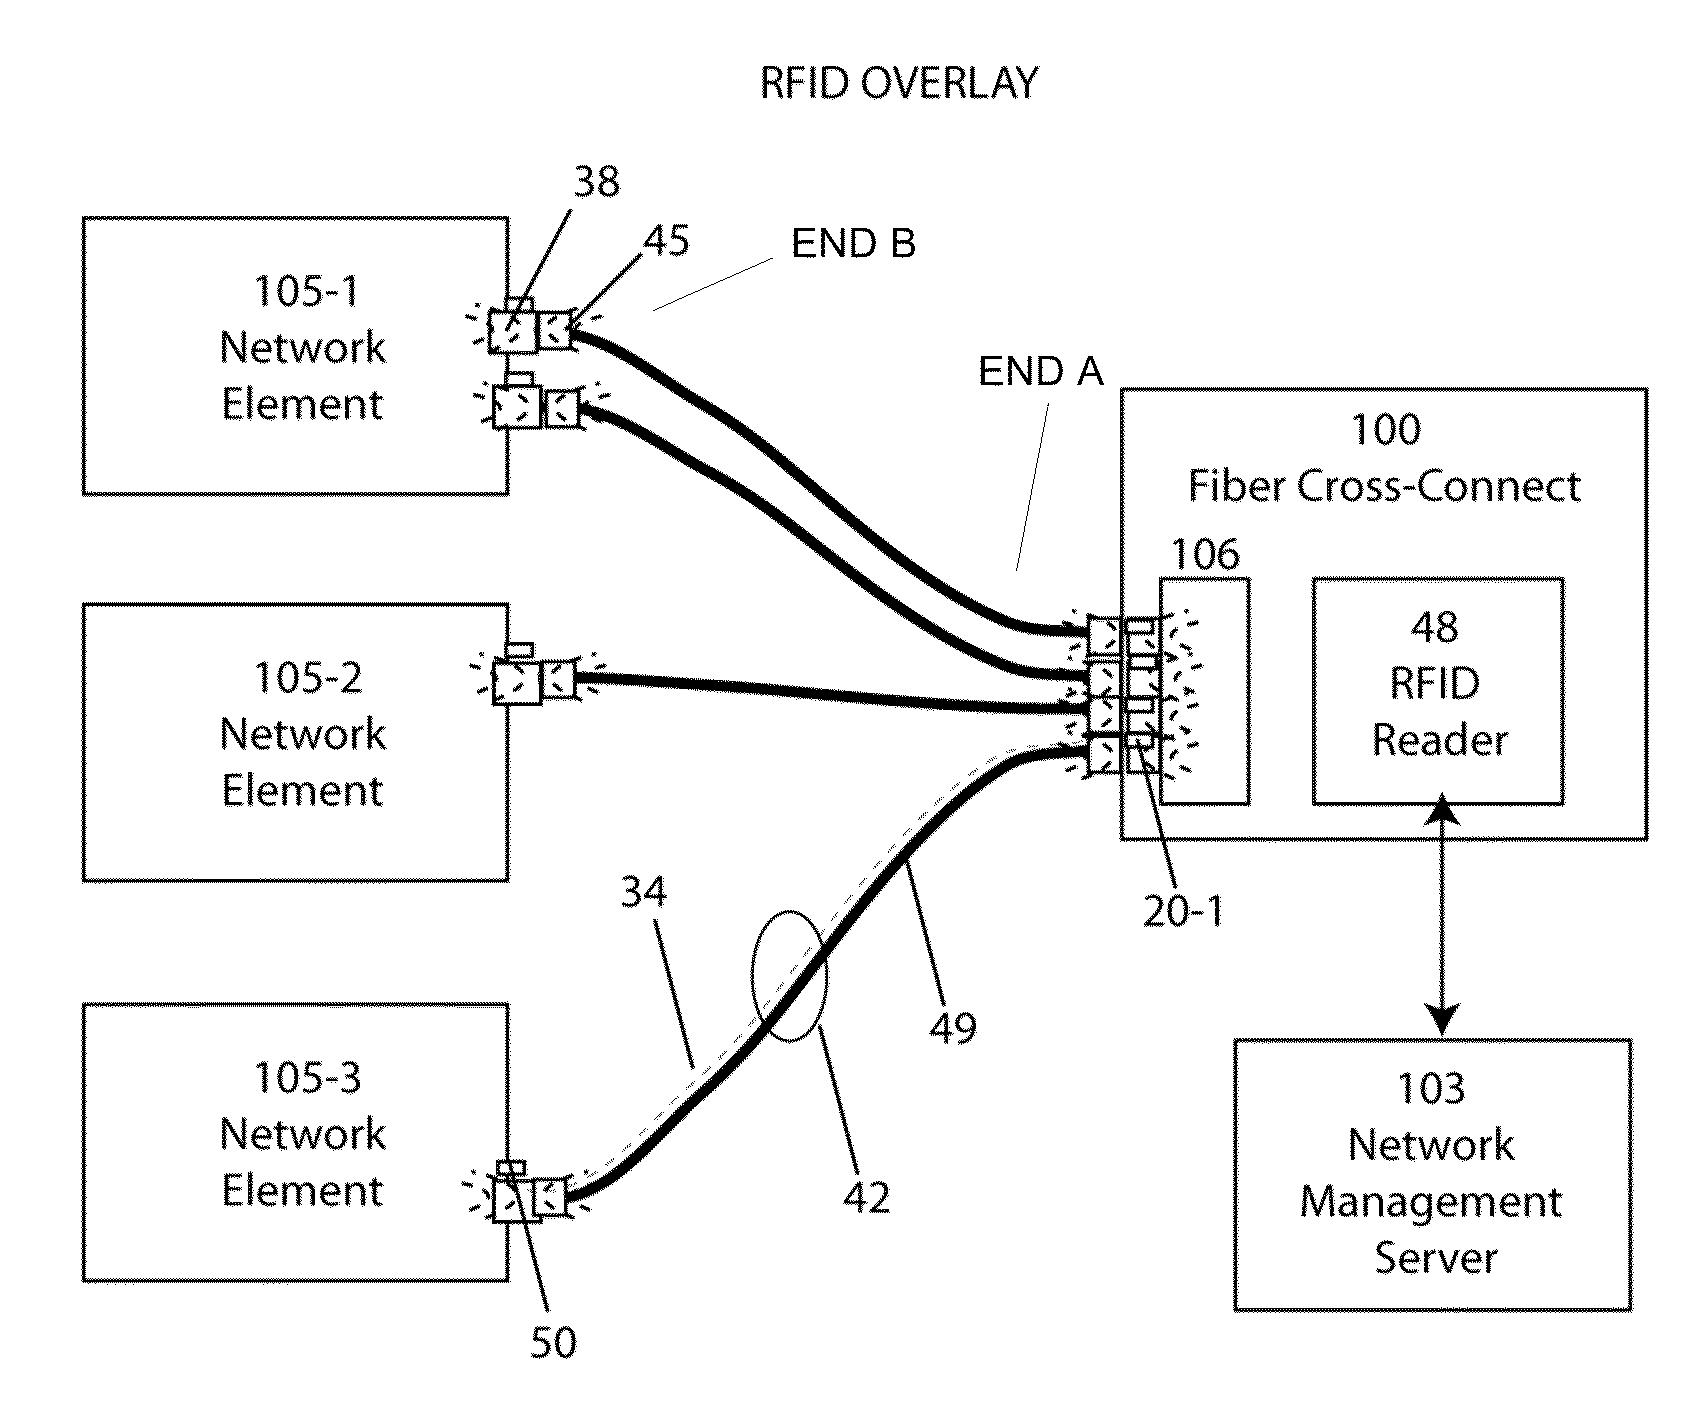 Radio frequency identification overlay network for fiber optic communication systems